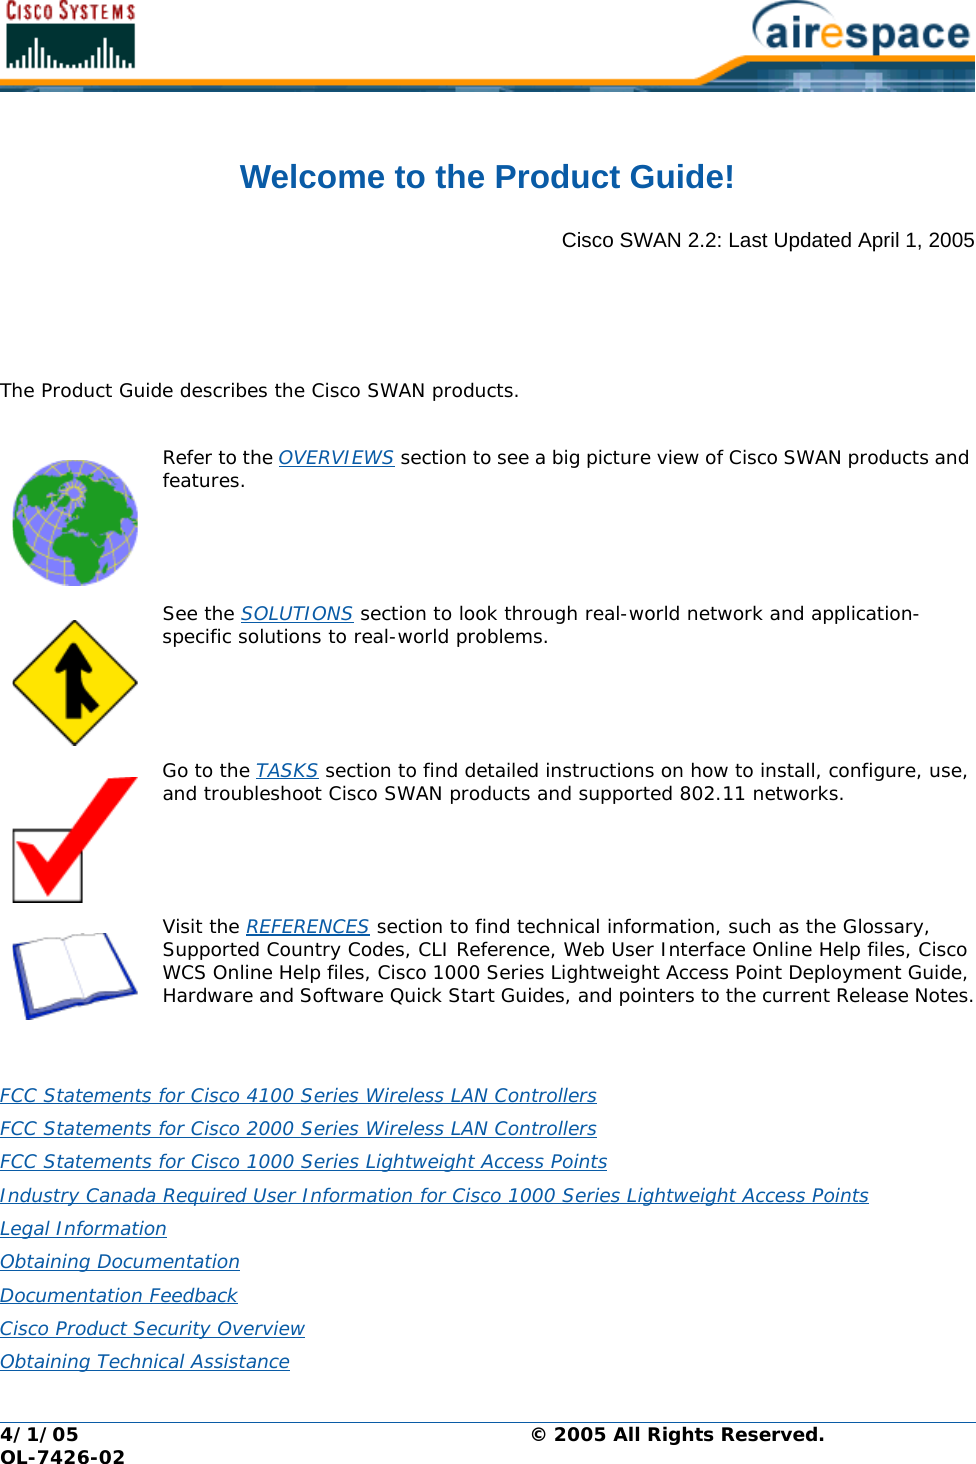 4/1/05 © 2005 All Rights Reserved.  OL-7426-02Welcome to the Product Guide!Product GuideCisco SWAN 2.2: Last Updated April 1, 2005The Product Guide describes the Cisco SWAN products.Refer to the OVERVIEWS section to see a big picture view of Cisco SWAN products and features. See the SOLUTIONS section to look through real-world network and application- specific solutions to real-world problems.Go to the TASKS section to find detailed instructions on how to install, configure, use, and troubleshoot Cisco SWAN products and supported 802.11 networks.Visit the REFERENCES section to find technical information, such as the Glossary, Supported Country Codes, CLI Reference, Web User Interface Online Help files, Cisco WCS Online Help files, Cisco 1000 Series Lightweight Access Point Deployment Guide, Hardware and Software Quick Start Guides, and pointers to the current Release Notes.FCC Statements for Cisco 4100 Series Wireless LAN Controllers FCC Statements for Cisco 2000 Series Wireless LAN Controllers FCC Statements for Cisco 1000 Series Lightweight Access Points Industry Canada Required User Information for Cisco 1000 Series Lightweight Access Points Legal Information Obtaining Documentation Documentation Feedback Cisco Product Security Overview Obtaining Technical Assistance 